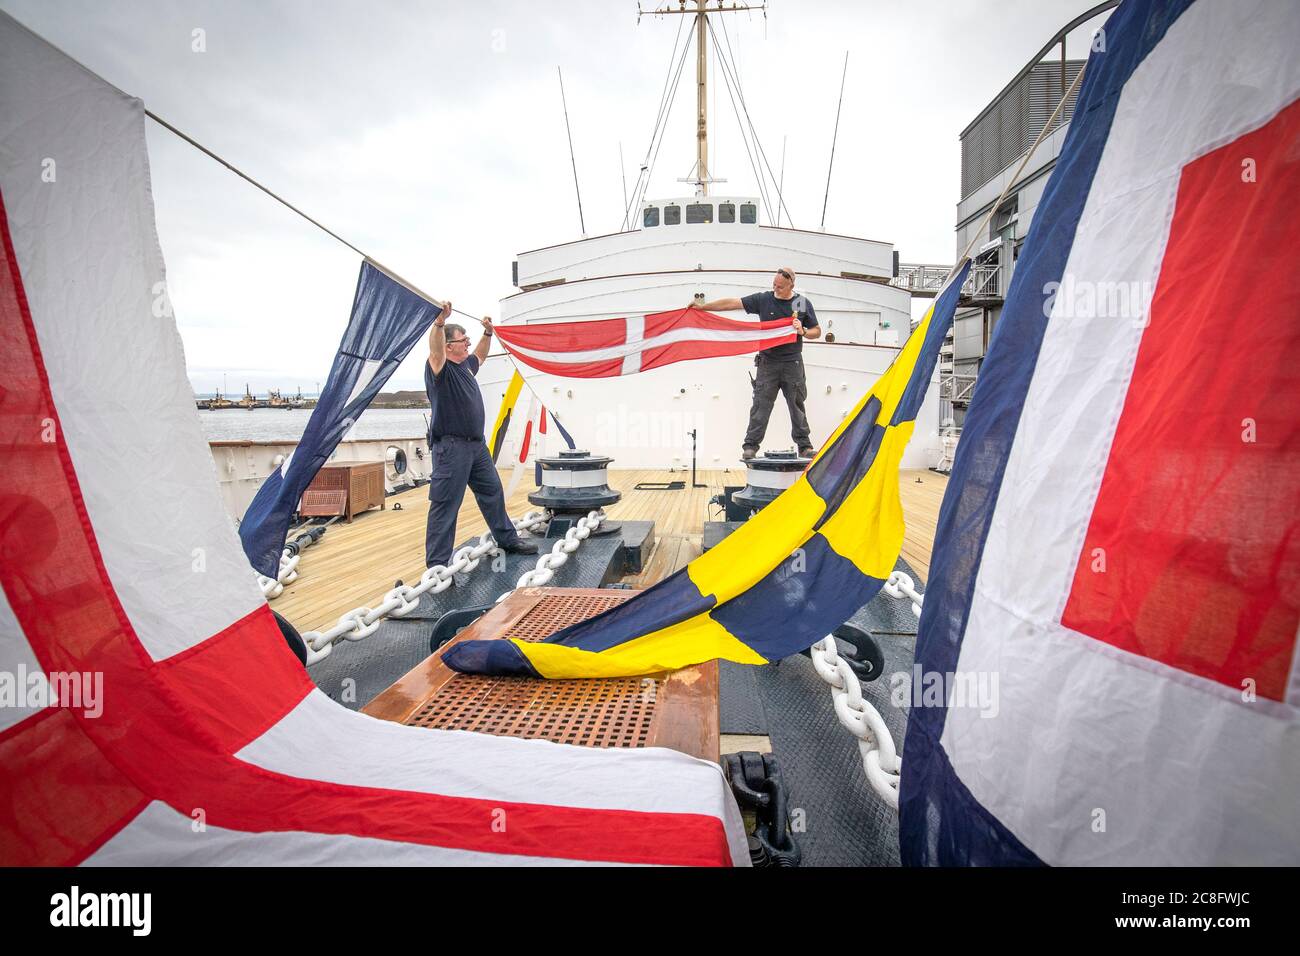 Tony Smith (left) and Rab McAulay, from the maintenance team, raise the dress flags on The Royal Yacht Britannia to mark the Edinburgh visitor attraction reopening to members of the public on Monday 27 July. Stock Photo